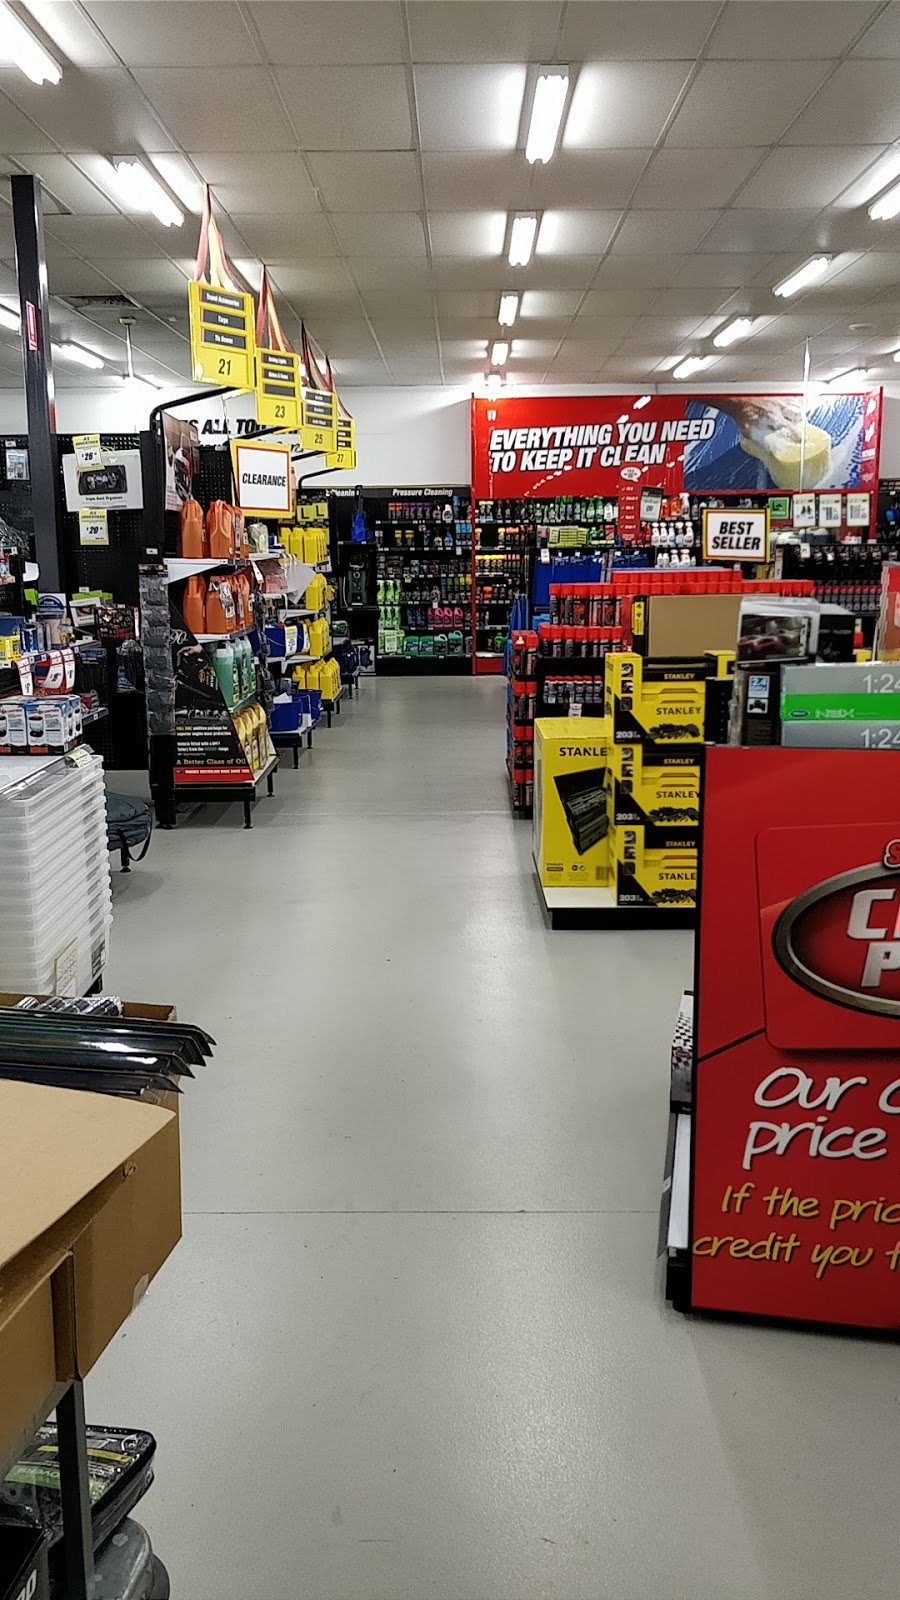 Supercheap Auto South Wentworthville | electronics store | 327/329 Great Western Hwy, South Wentworthville NSW 2145, Australia | 0298960166 OR +61 2 9896 0166